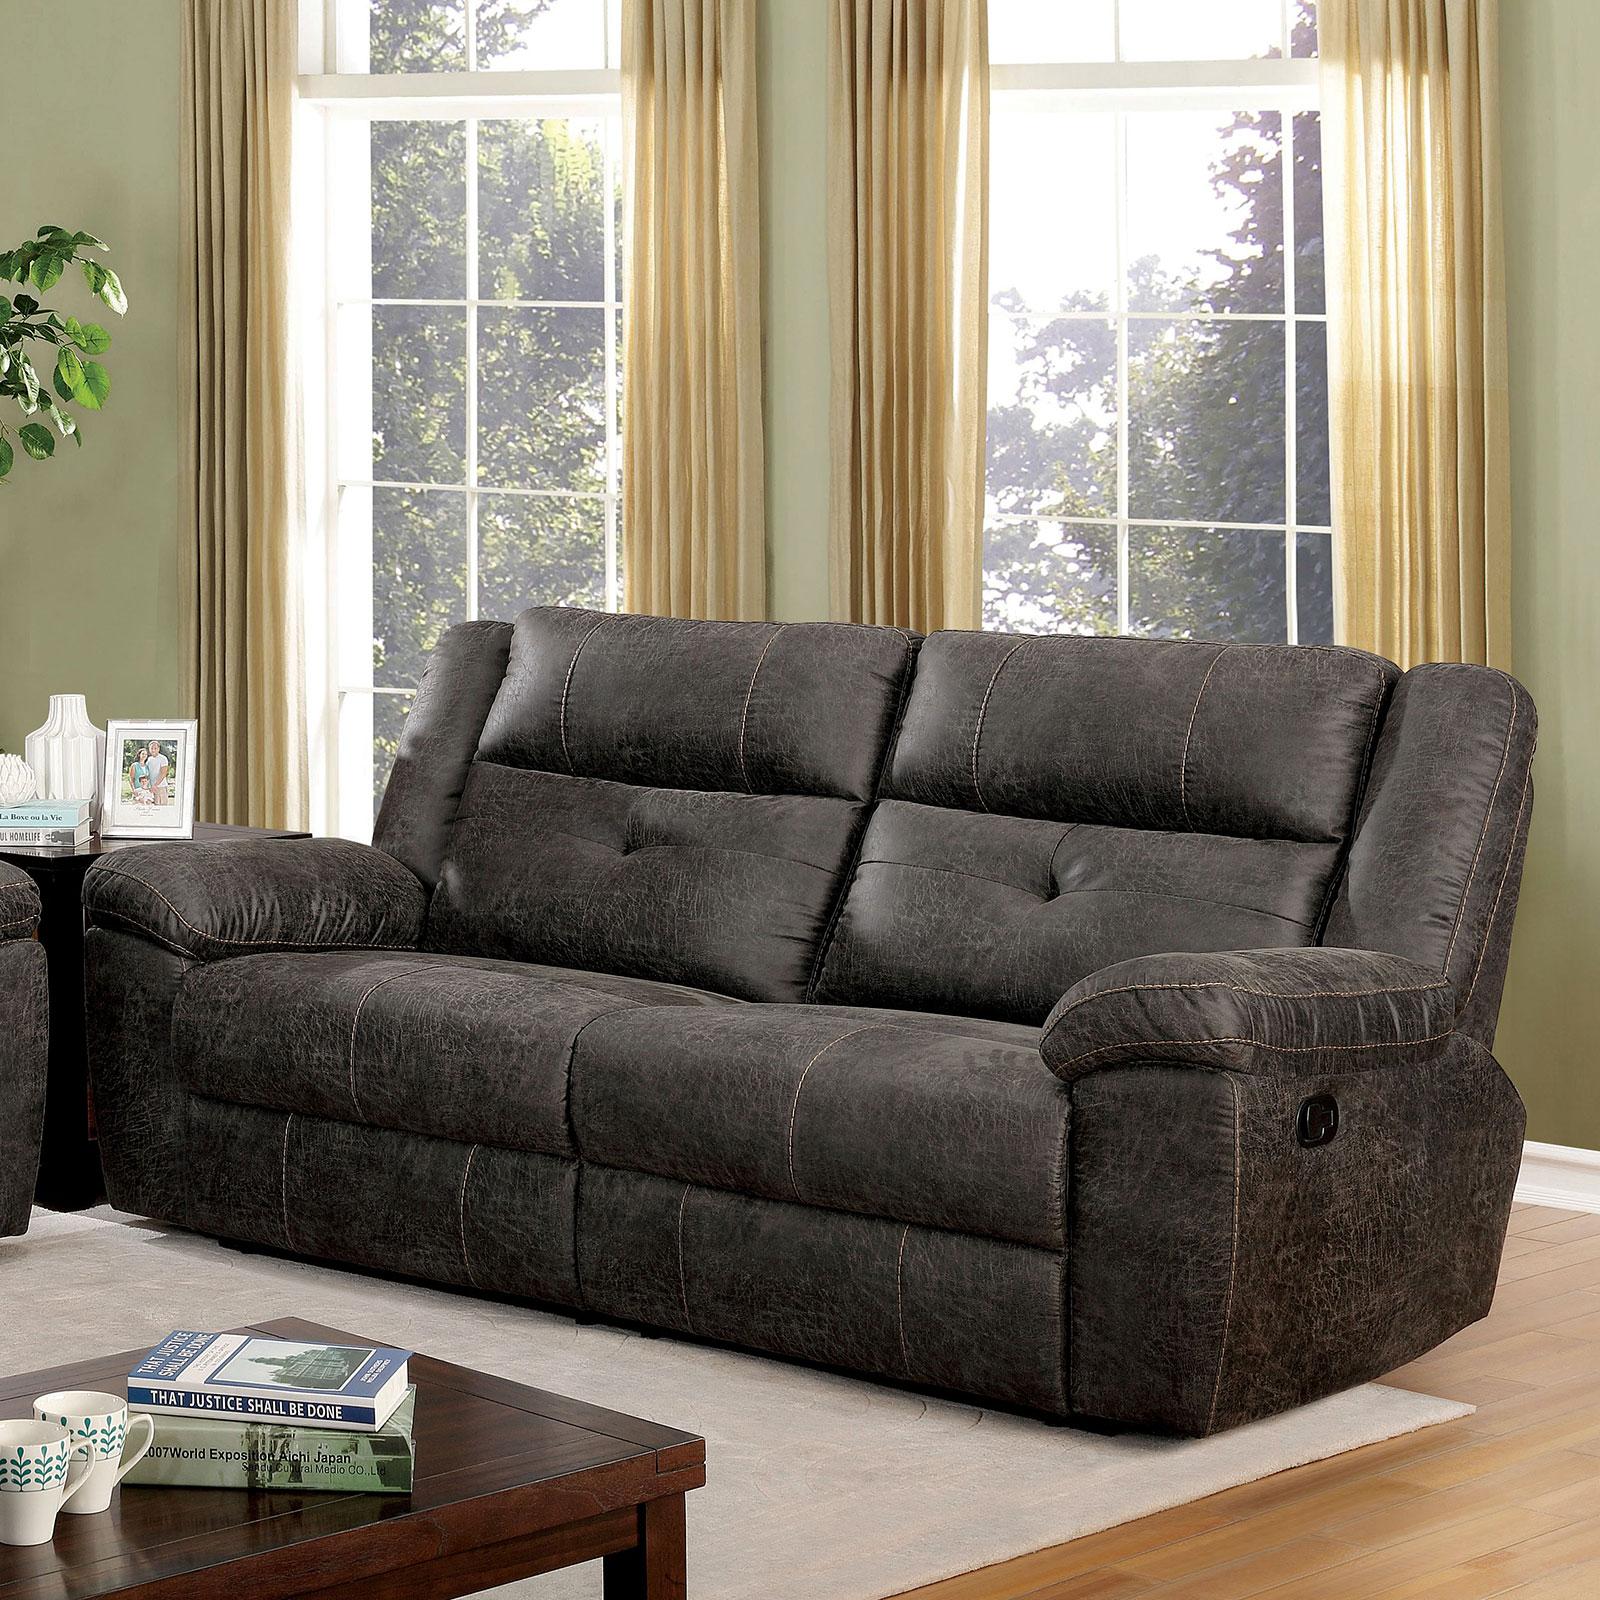 Transitional Reclining Loveseat CHICHESTER CM6943-LV CM6943-LV in Brown Fabric